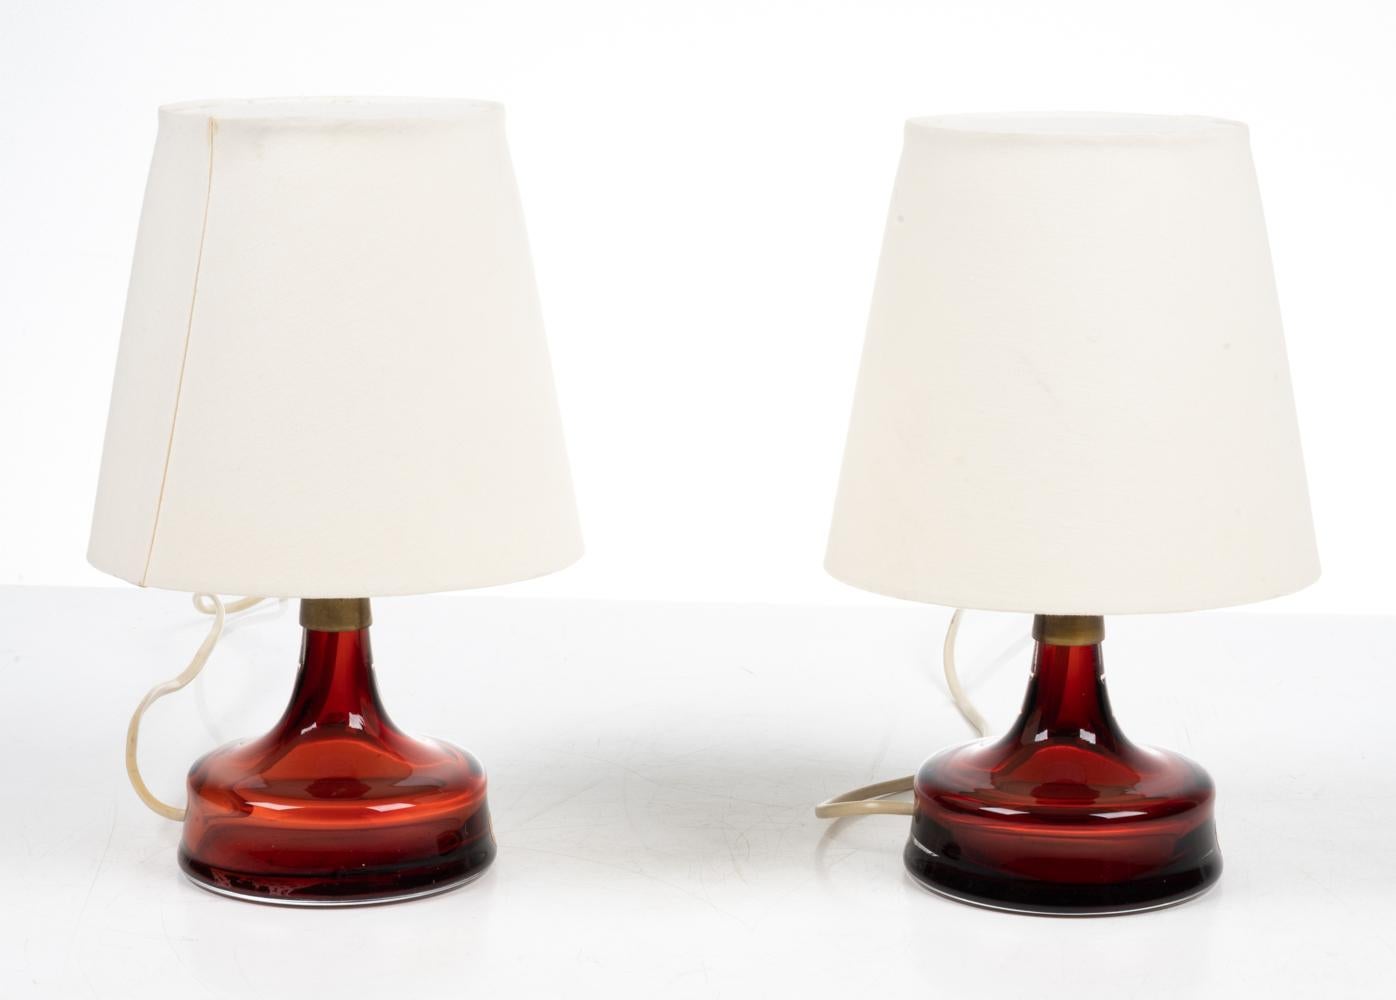 20th Century Pair of Diminutive Ruby Glass Table Lamps by Carl Fagerlund for Orrefors